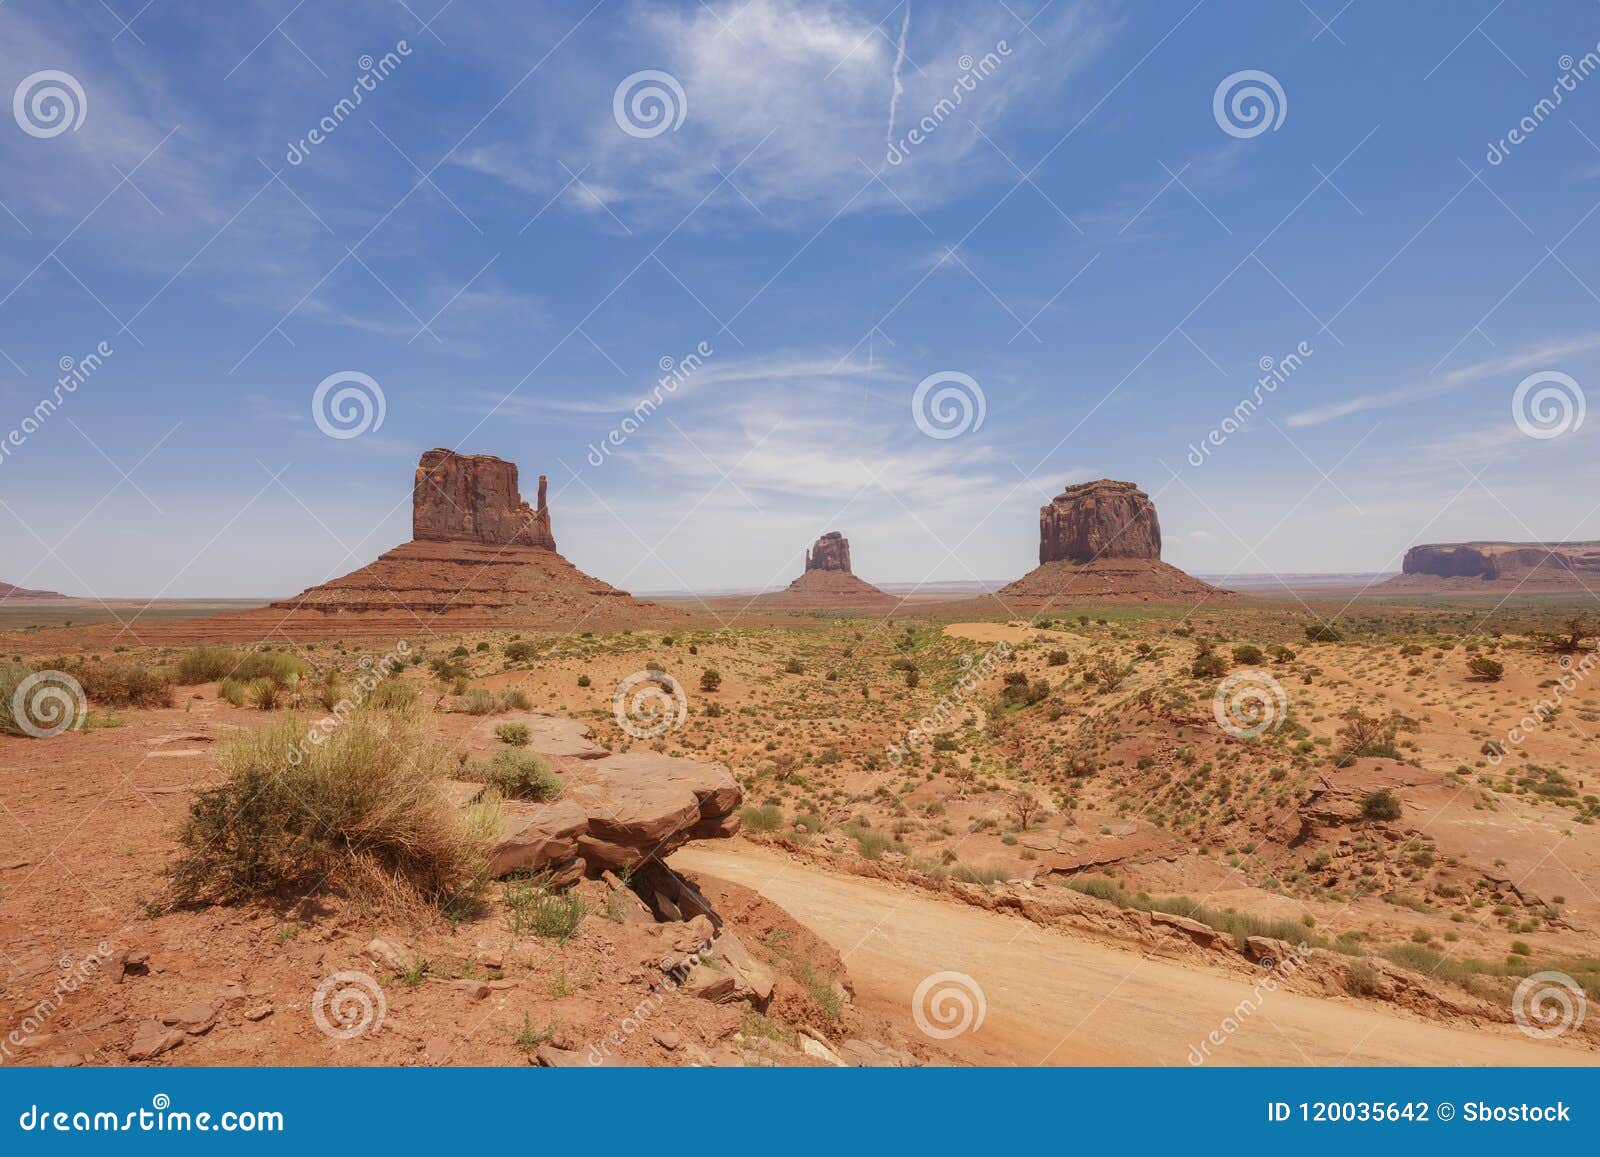 east and west mitten buttes, and merrick butte in monument valley navajo tribal park